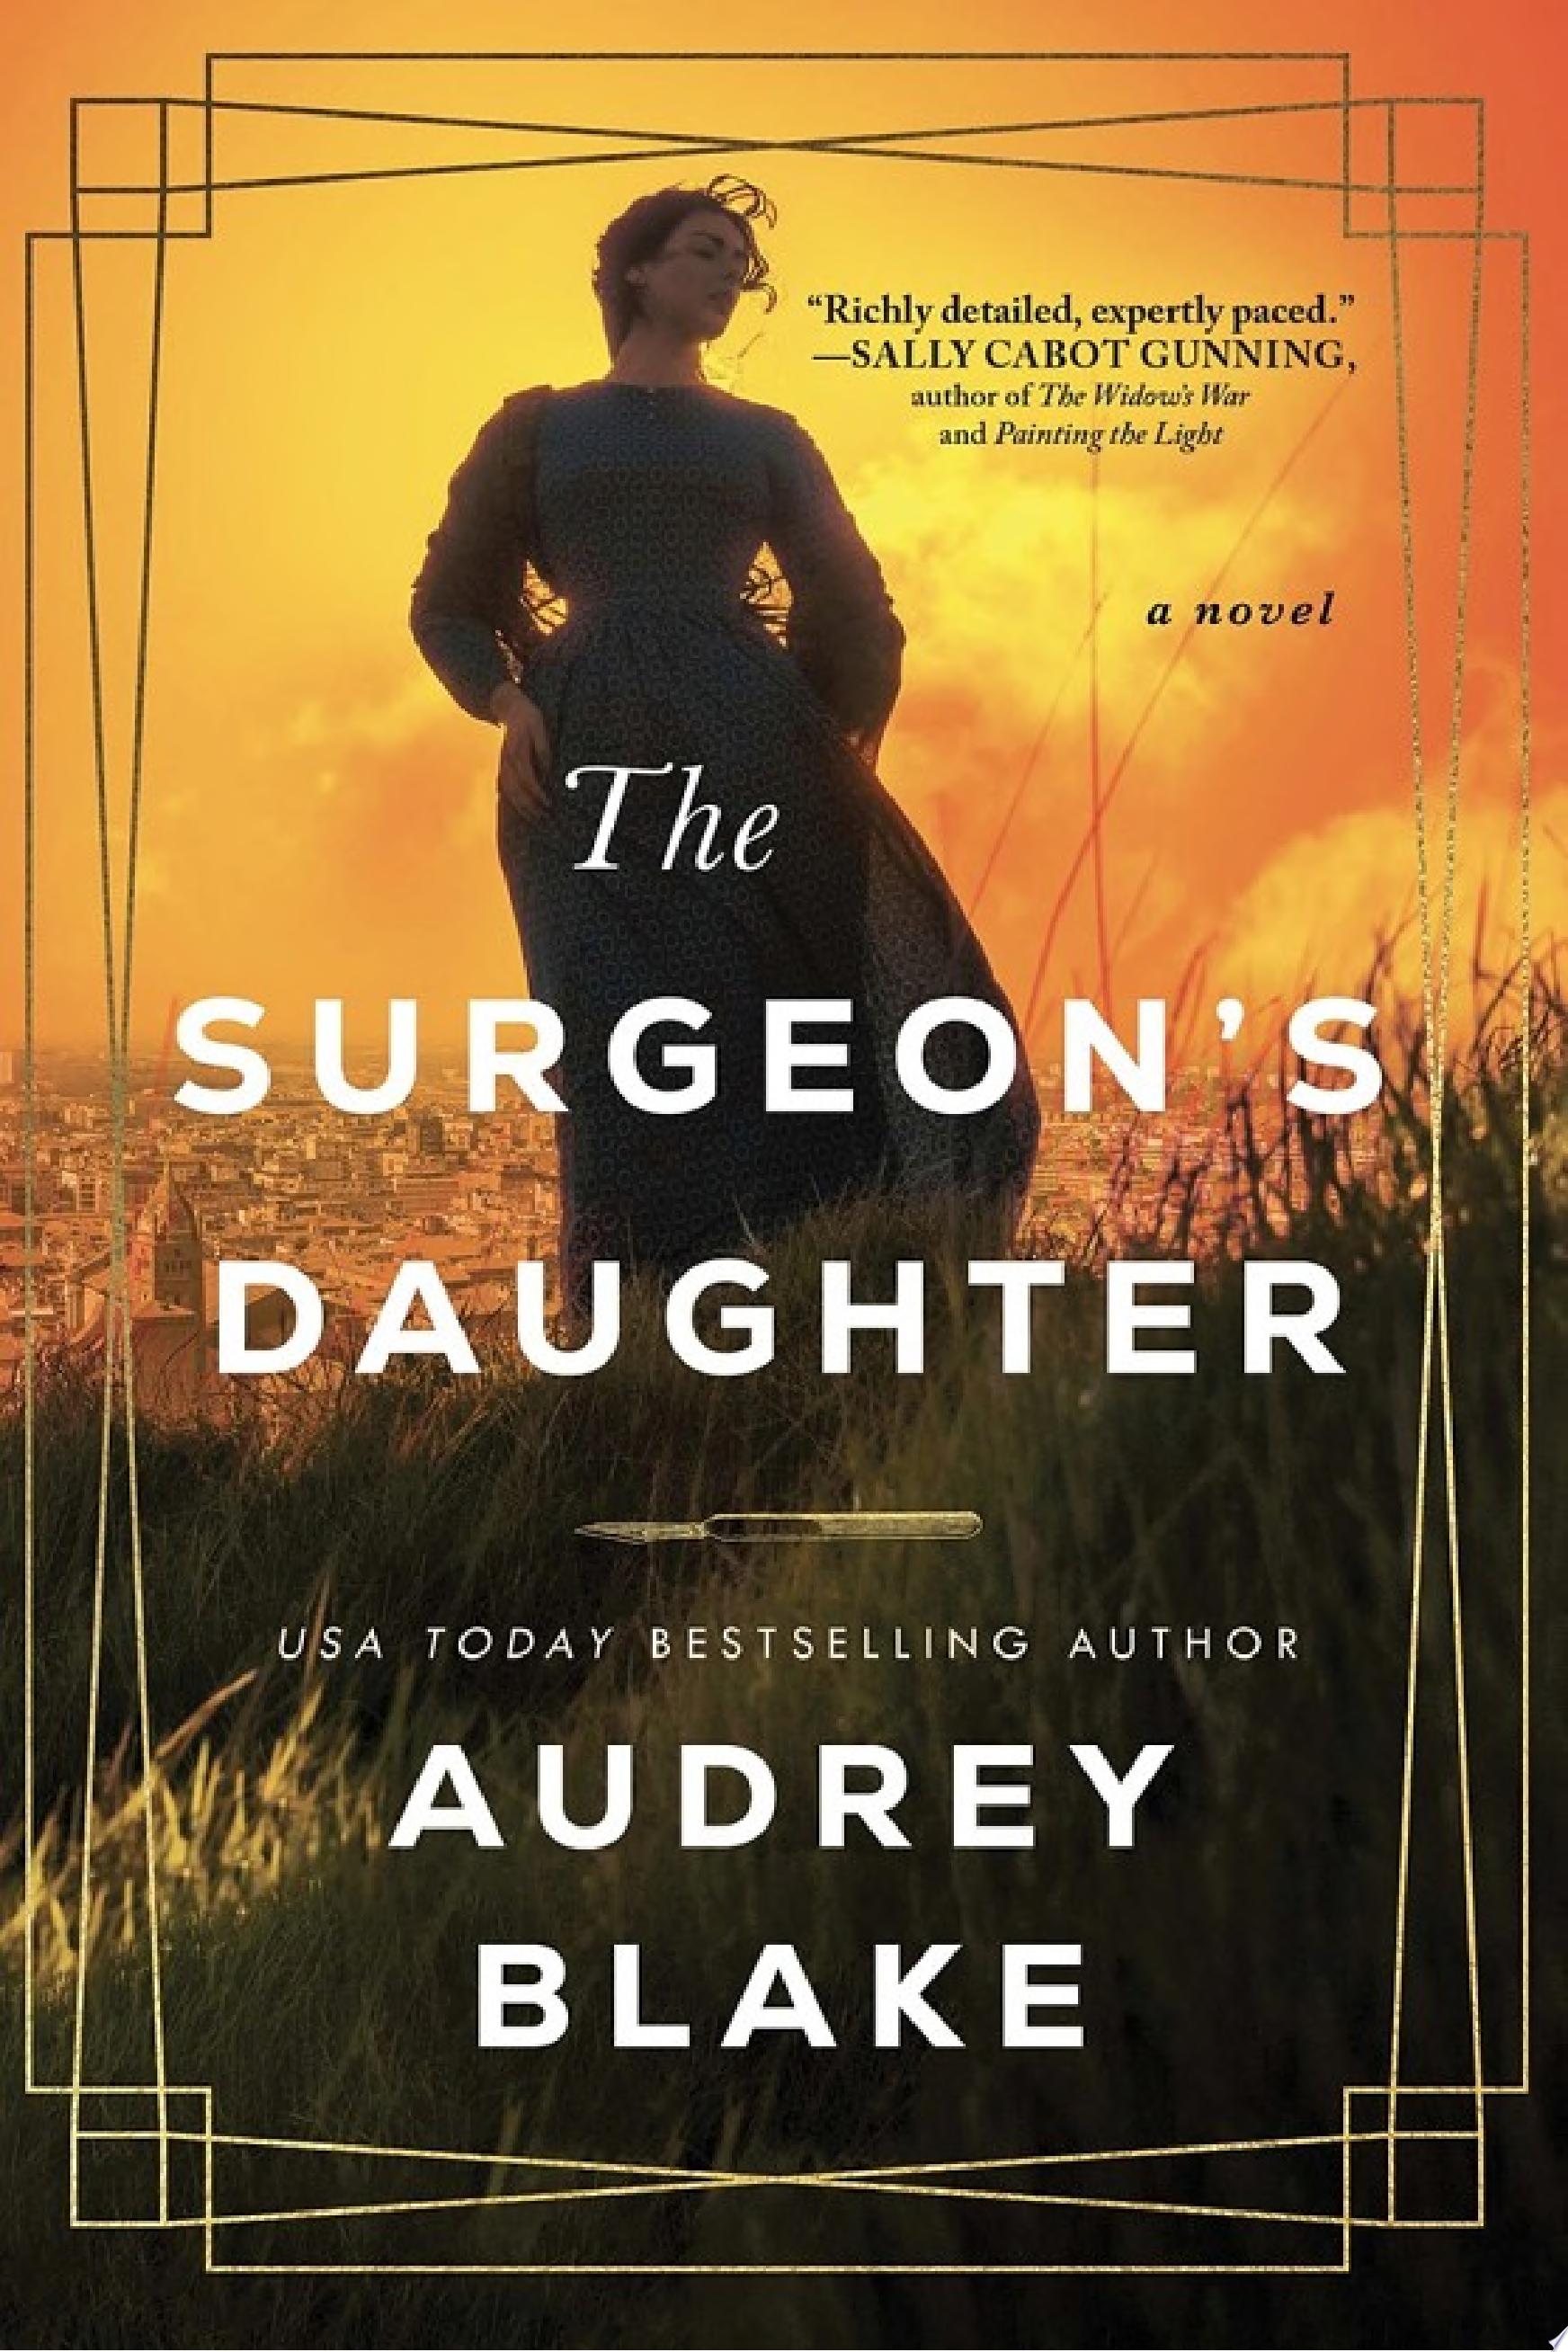 Image for "The Surgeon's Daughter"